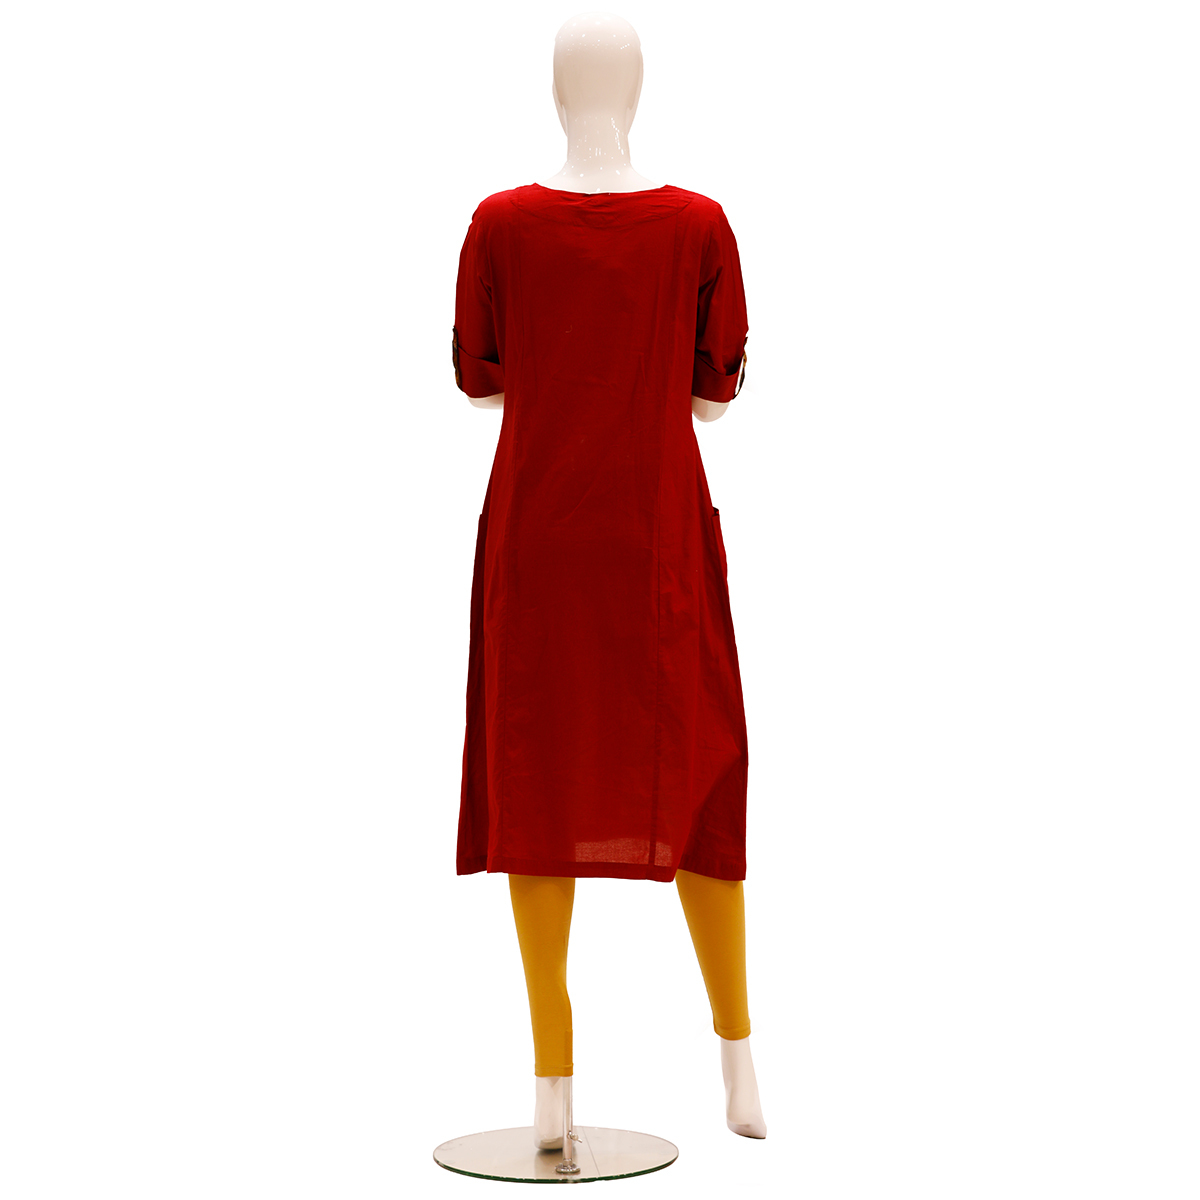 Geru Solid Color Straight Cut Kurta Styled With Pockets - Maroon